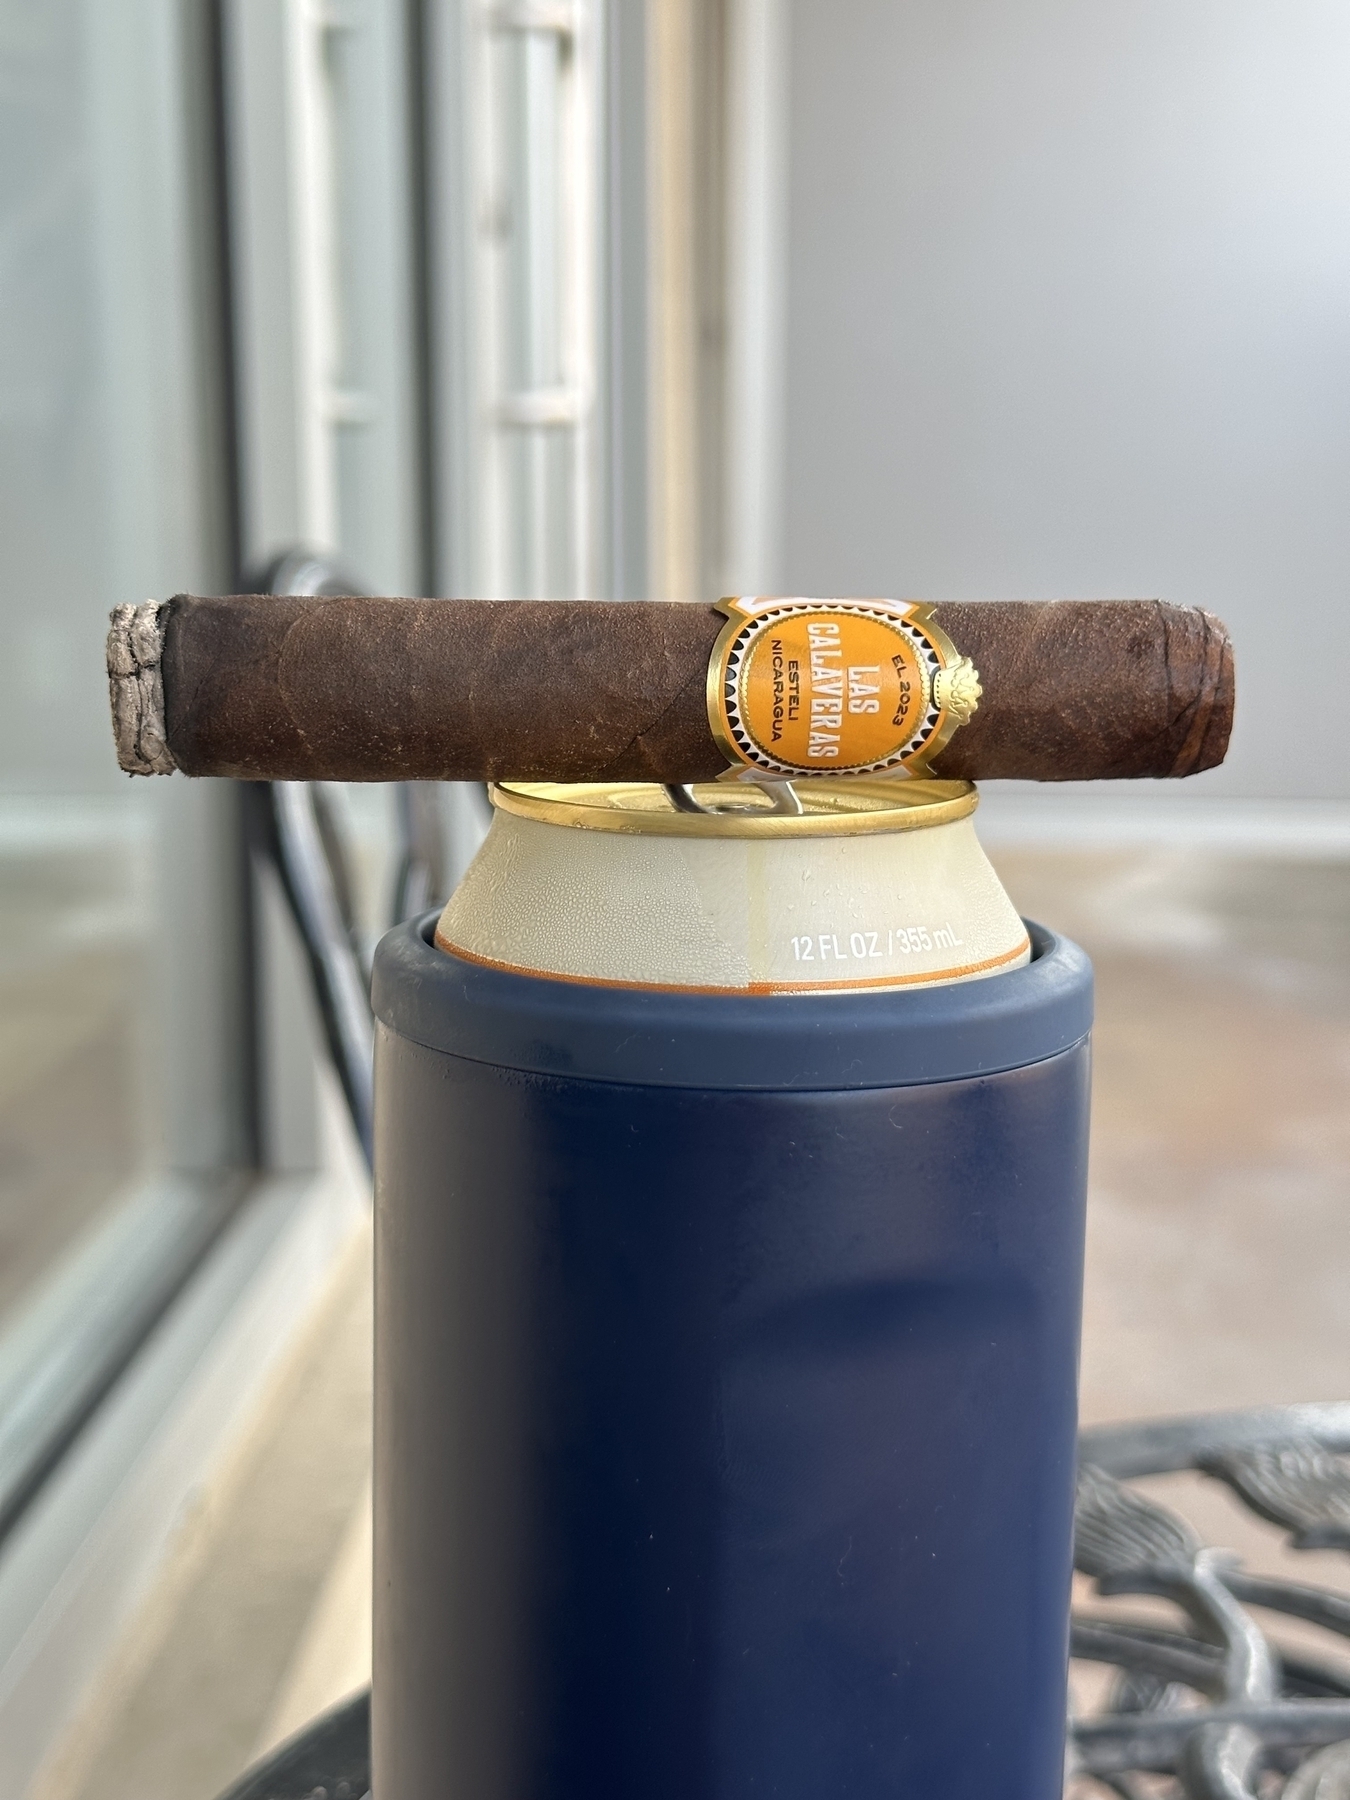 A lit Las Calaveras EL 2023 cigar on top of an open beer can which is inside of a blue insulated beer cozy thingy. 